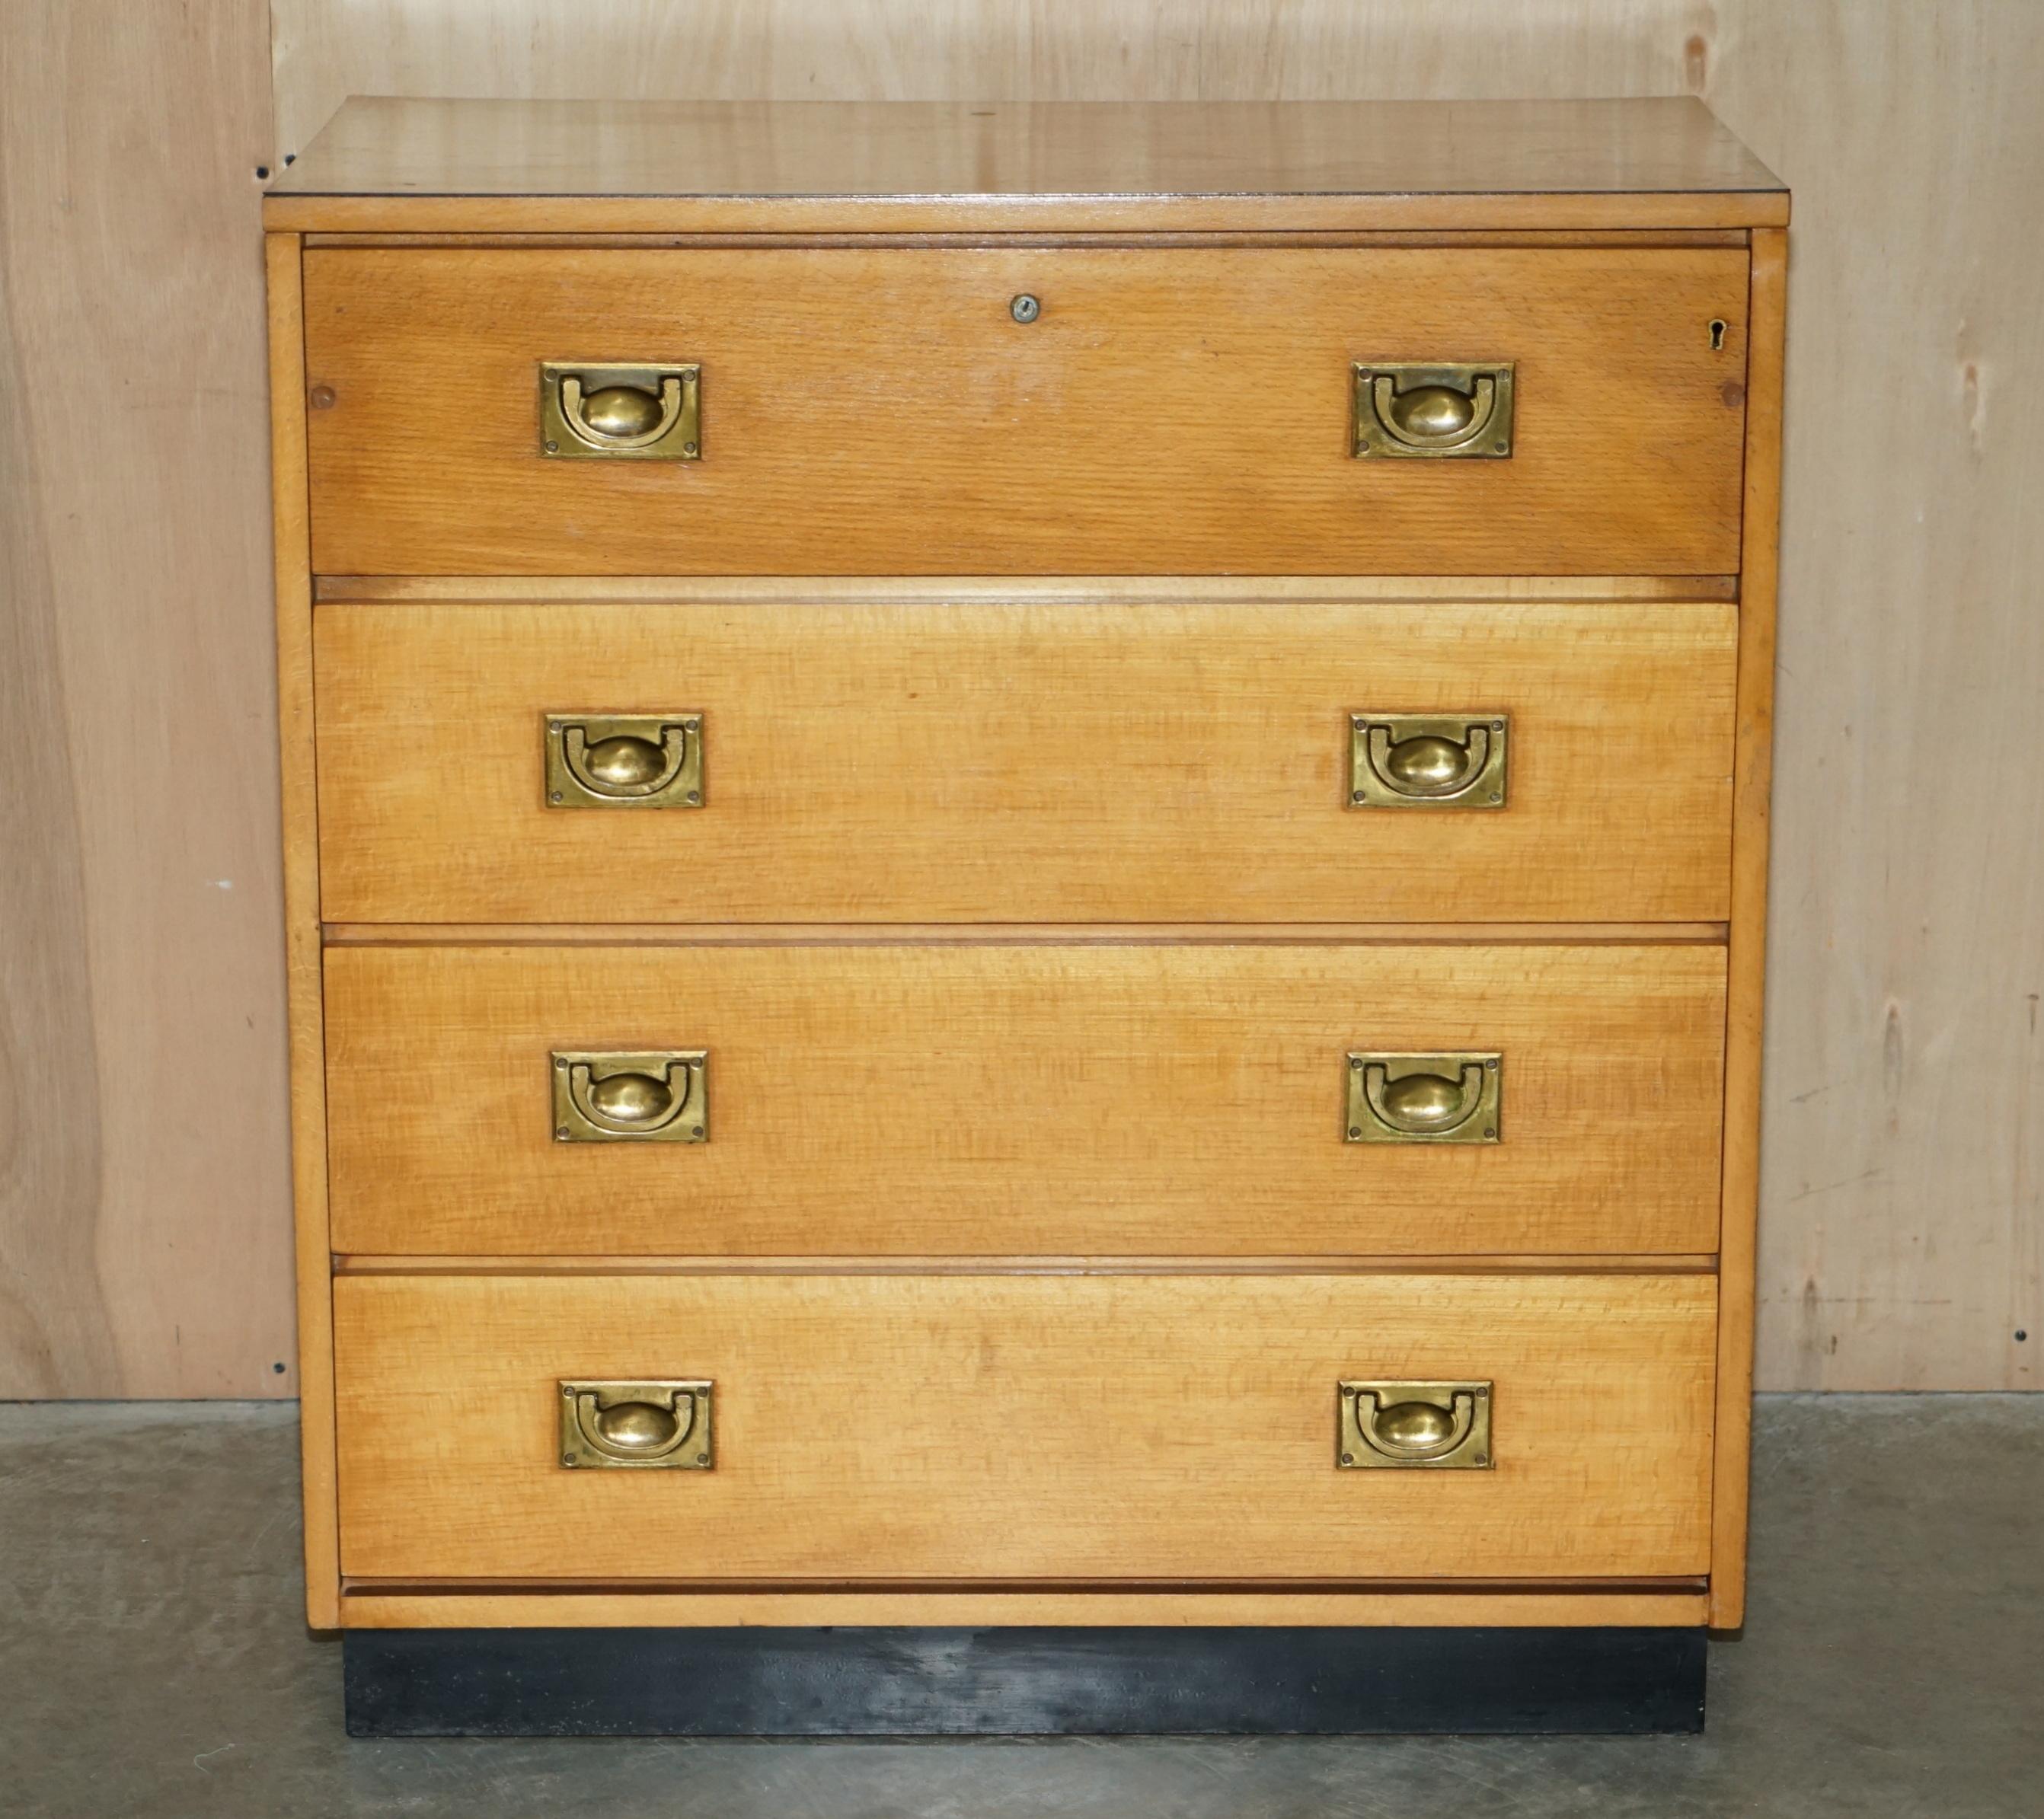 We are delighted to offer for sale this lovely circa 1920 Art Deco period English oak and brass Military Campaign chest of drawers with drop front top drawer.

This is a nicely made and utilitarian chest of drawers, the top drawer would have